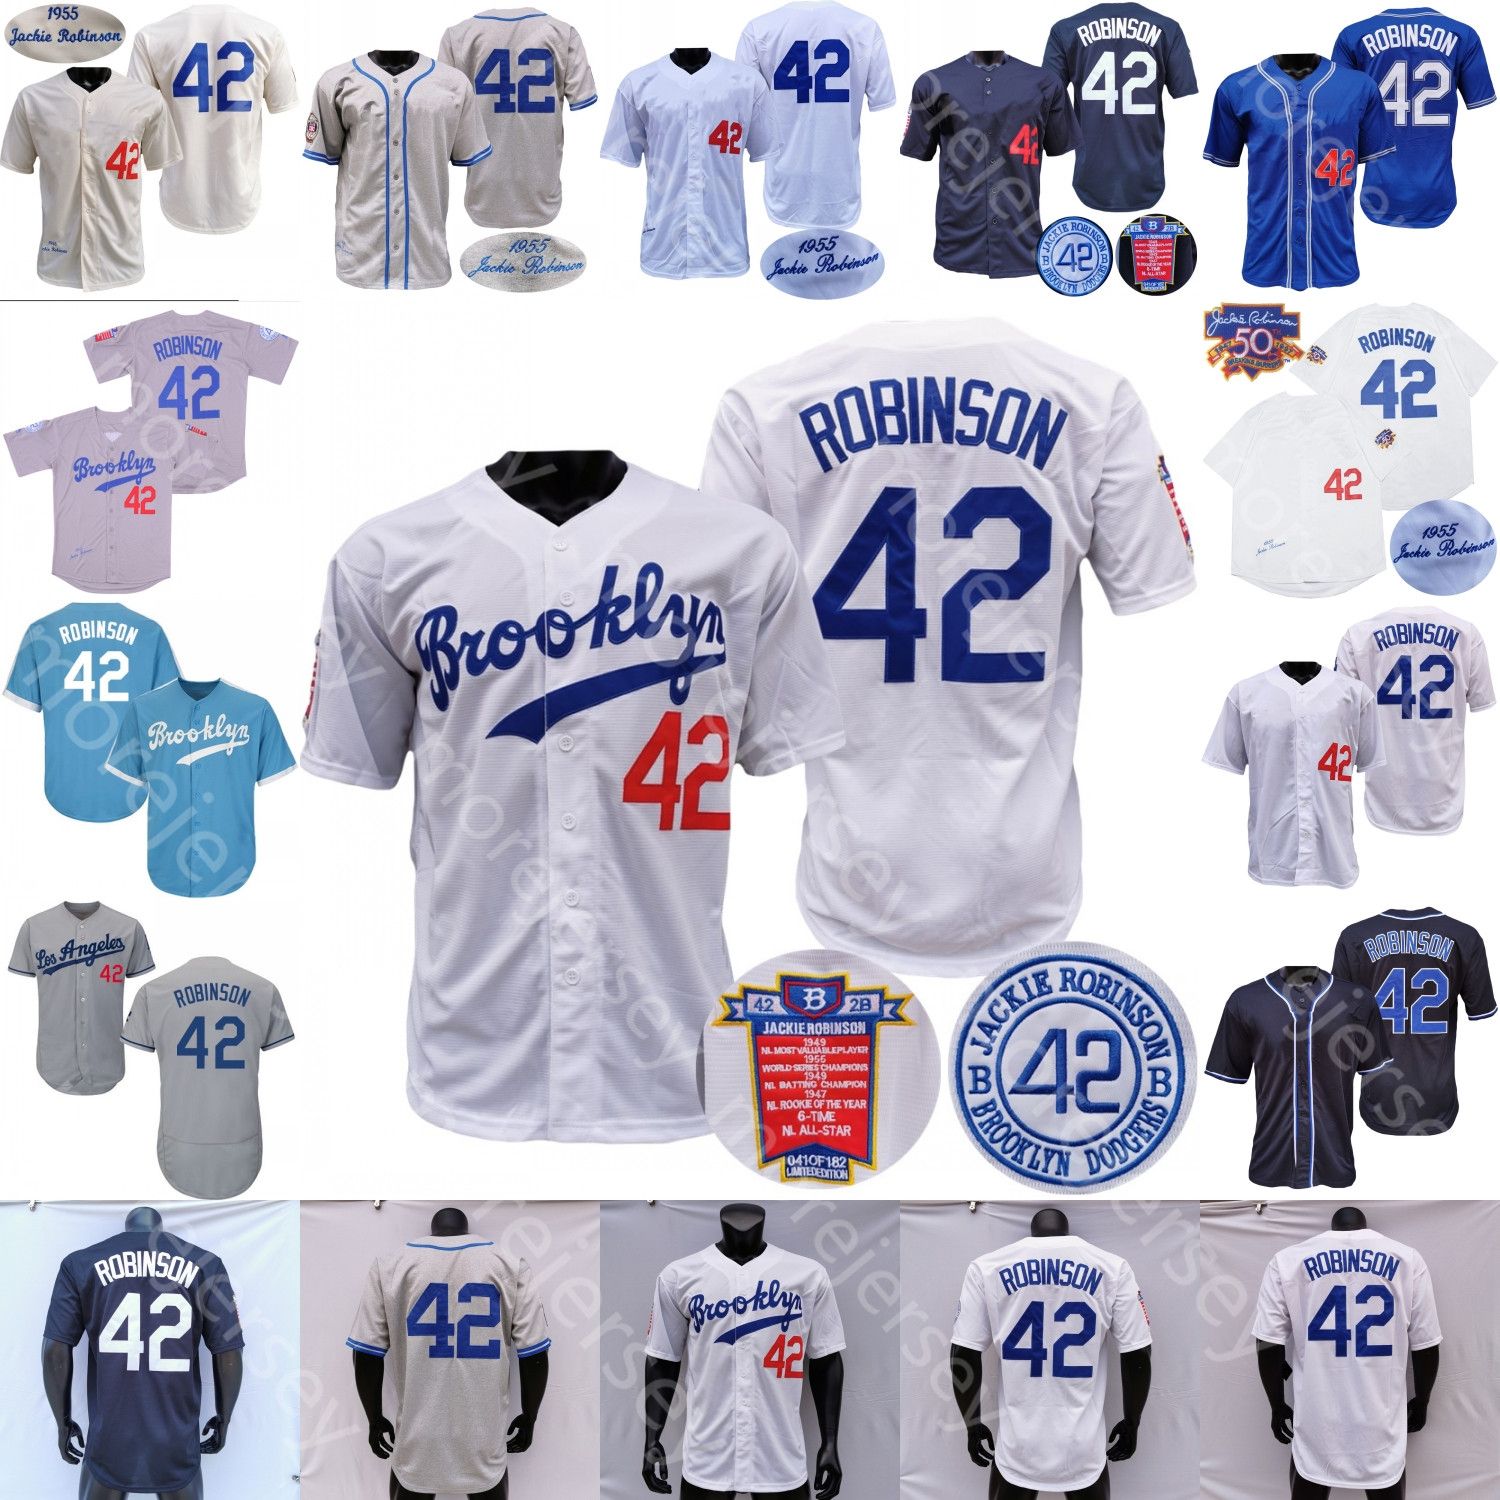 Jackie Robinson Jersey 1955 Cream Grey White Black Blue Fashion Grey Salute  To Service Hall Of Fame Patch From Morejersey, $15.55